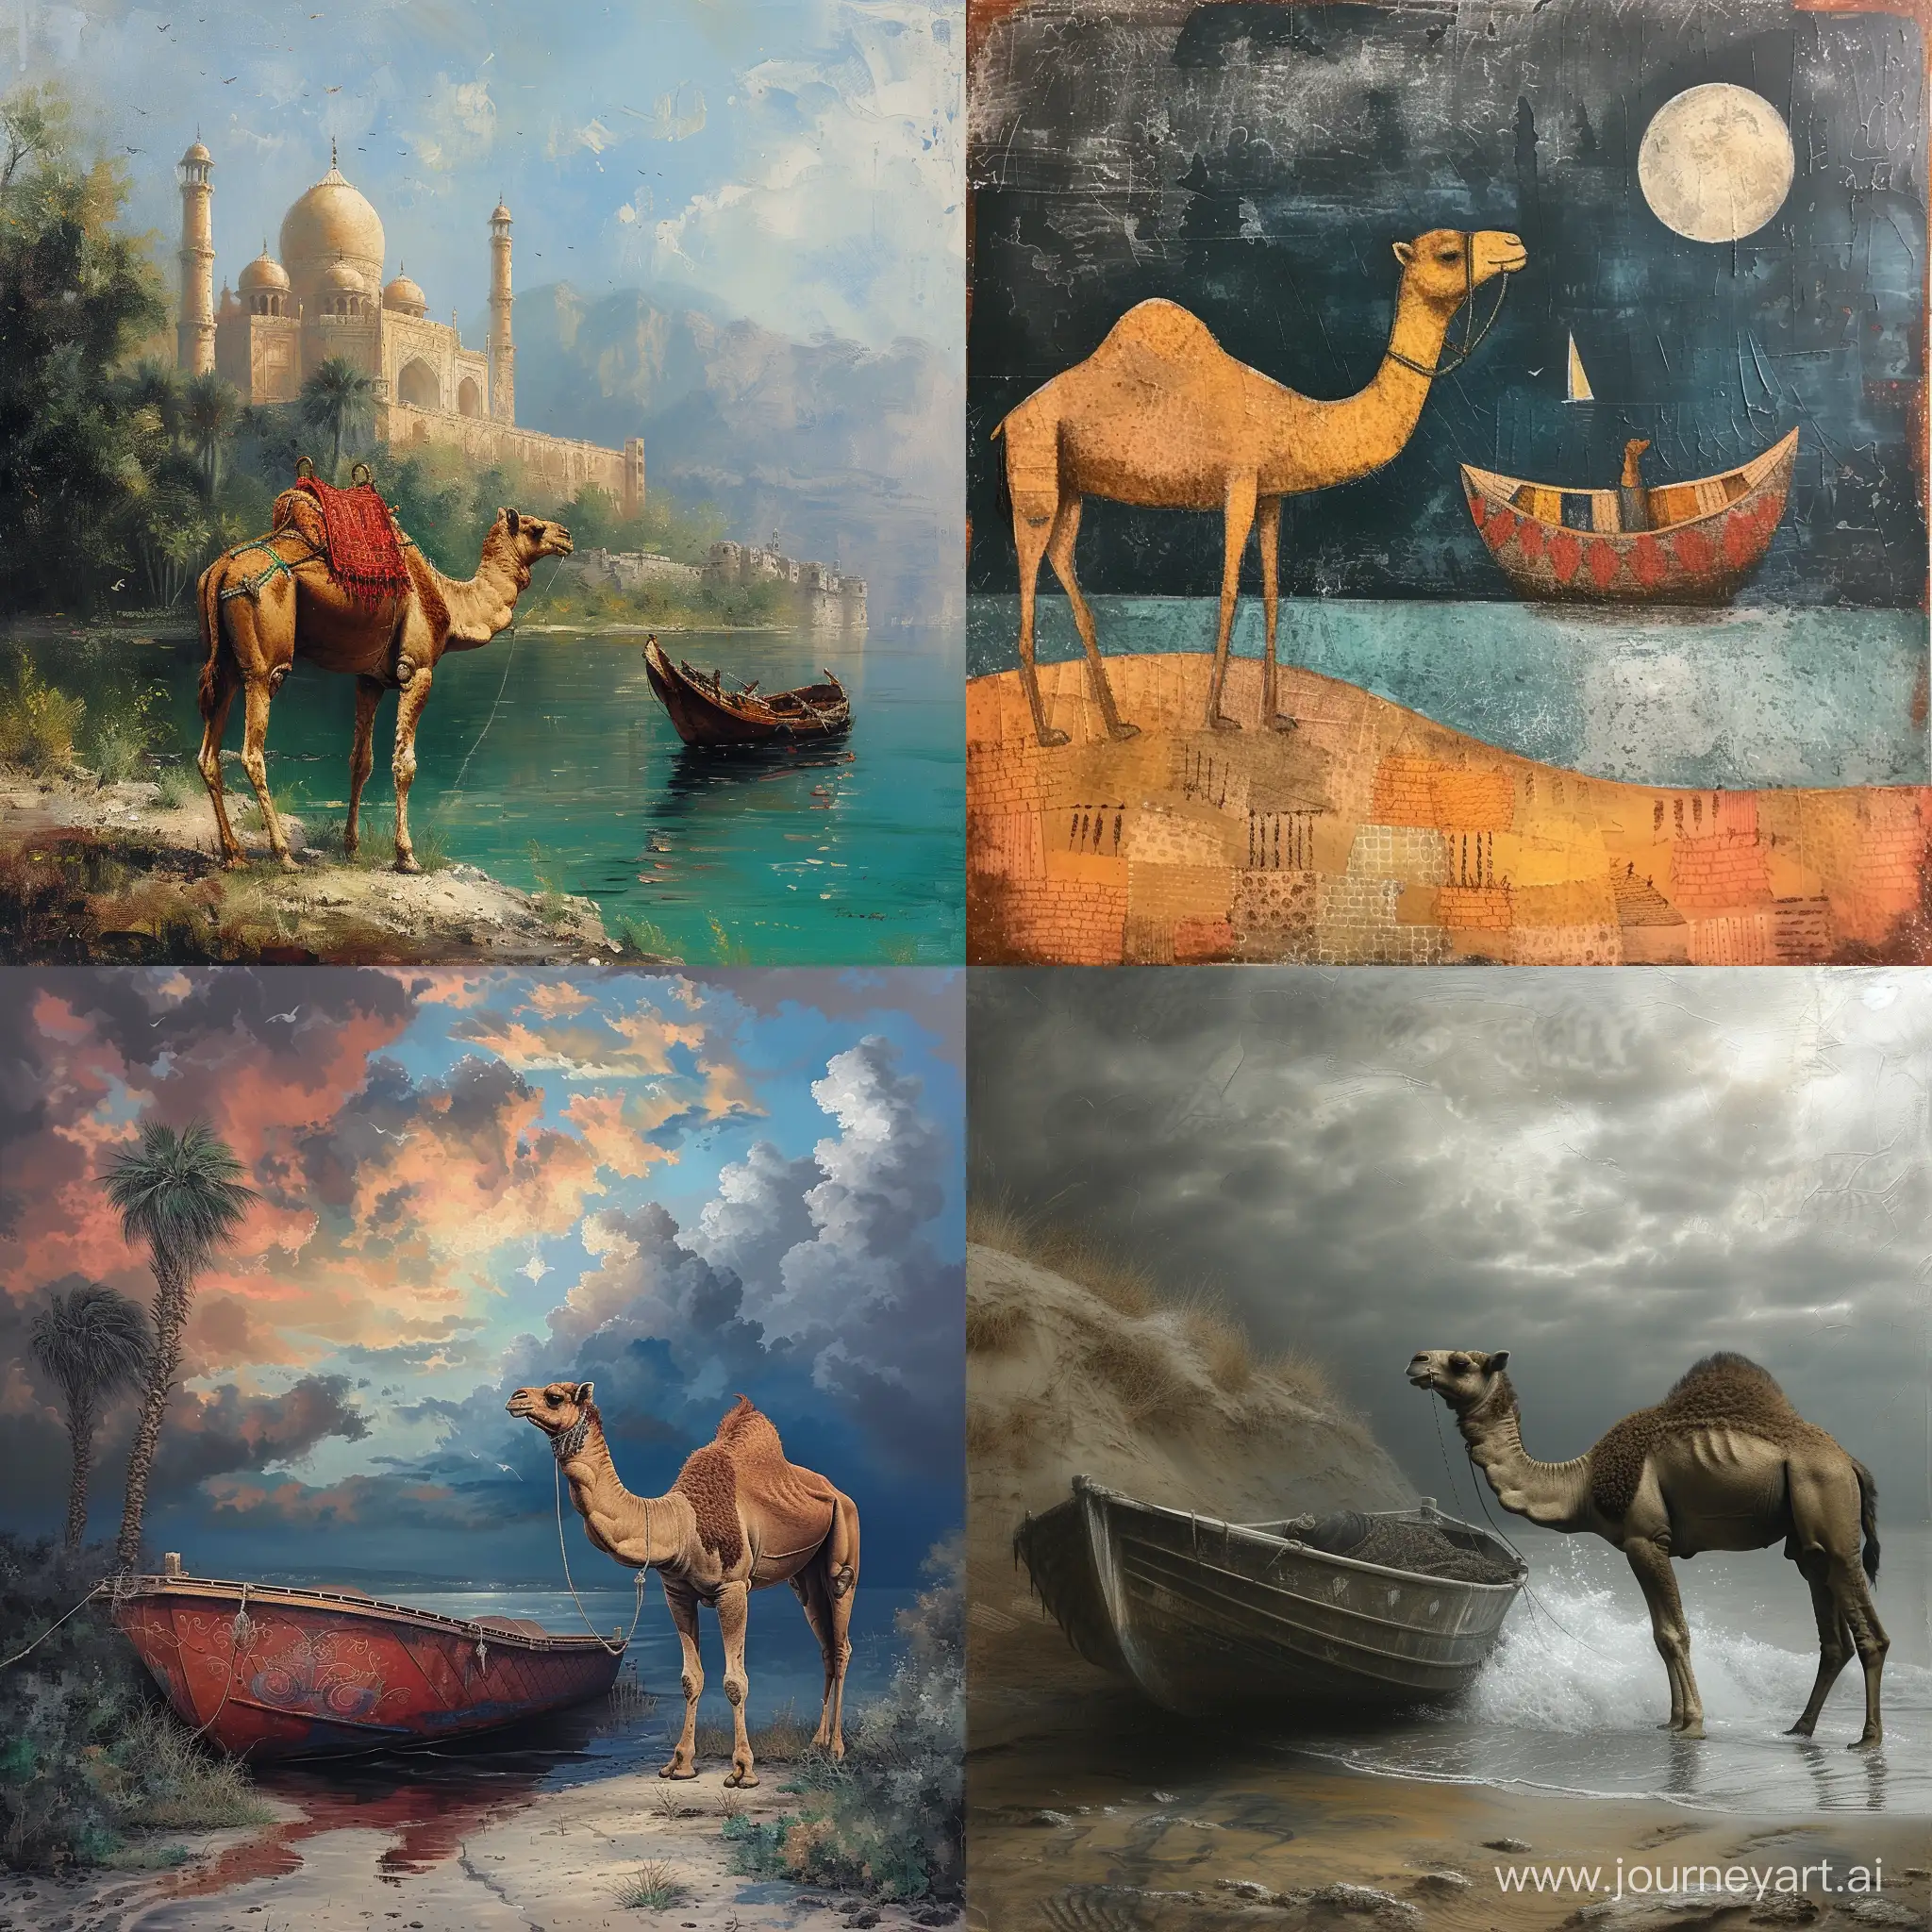 Playful-Boat-and-Camel-Merriment-in-a-Scenic-Setting